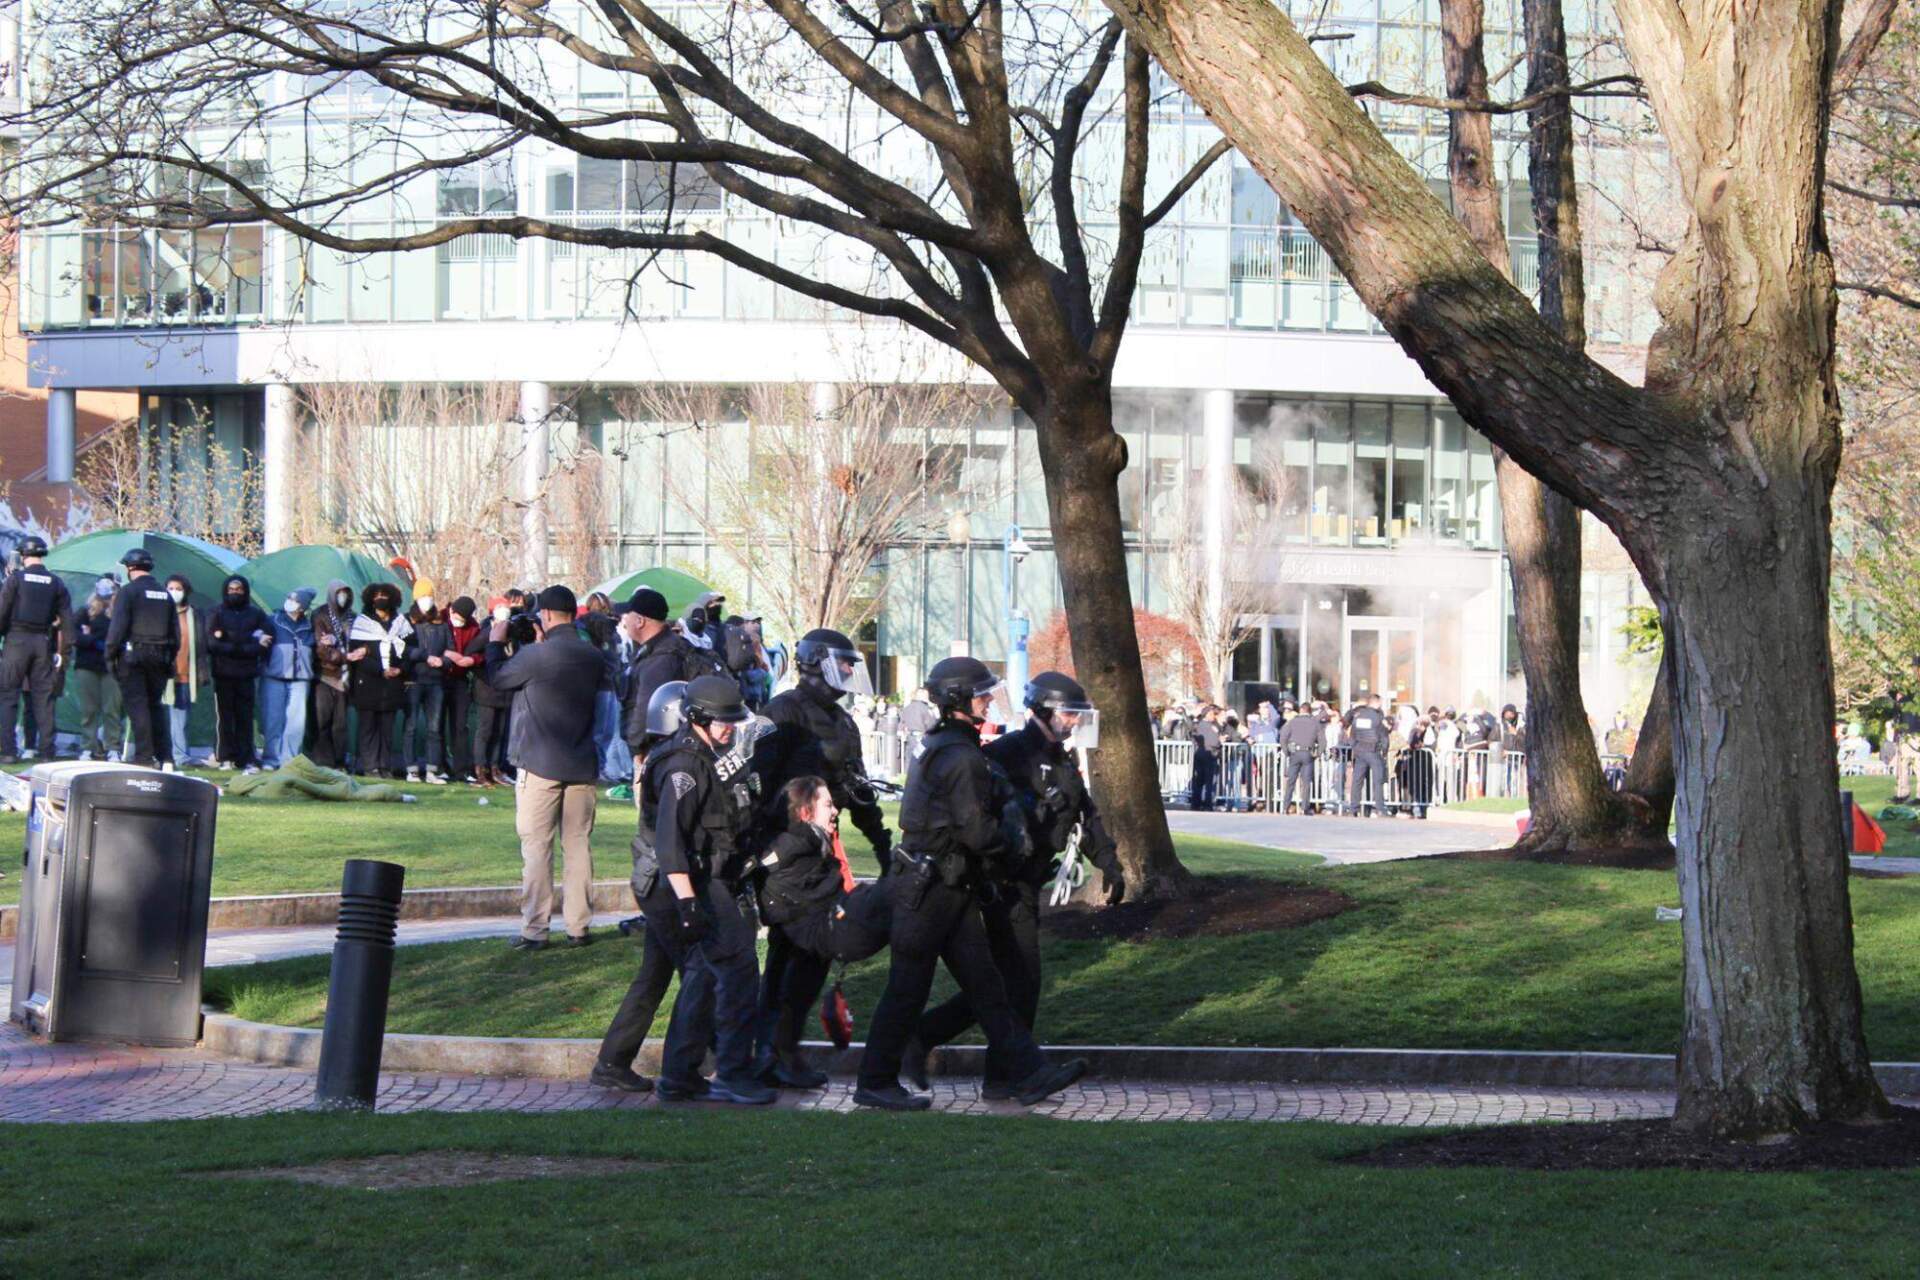 Police arrest and carry away a person from an encampment on the Northeastern University campus. (Kevin Gallagher/Huntington News)